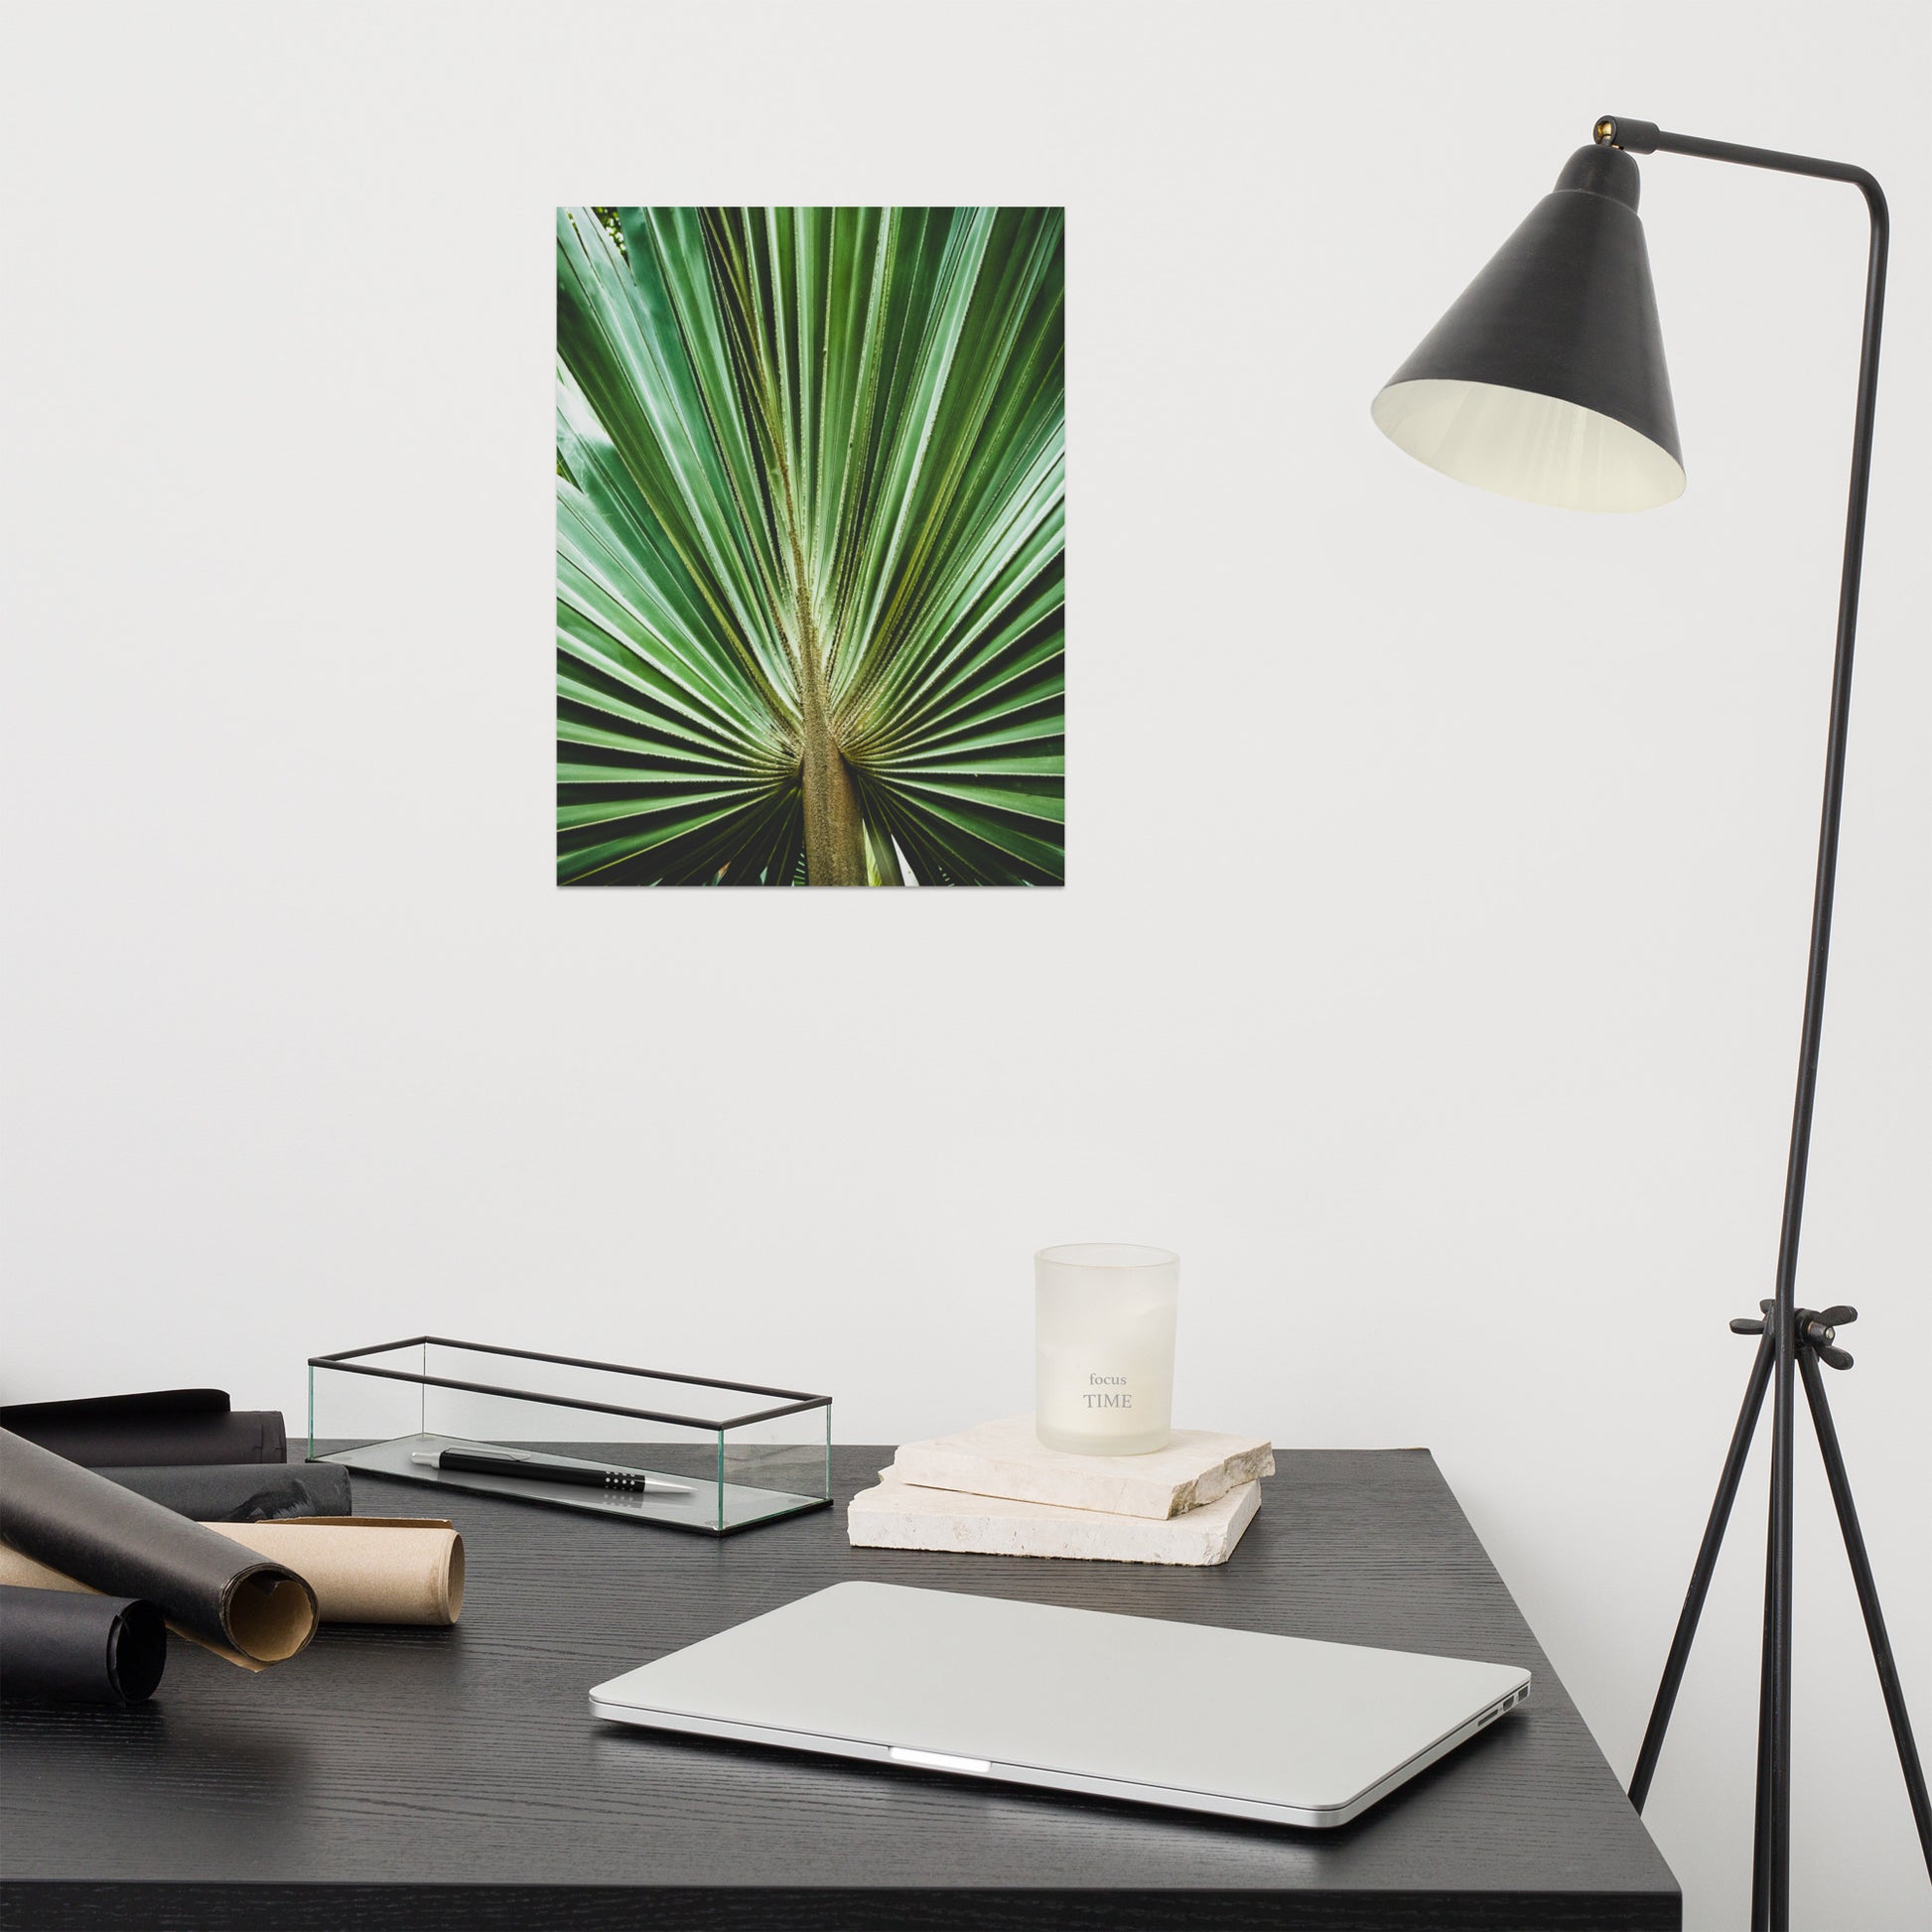 Medical Office Wall Art: Aged and Colorized Wide Palm Leaves 2 - Botanical / Plants / Nature Photograph Loose / Unframed Wall Art Print - Artwork